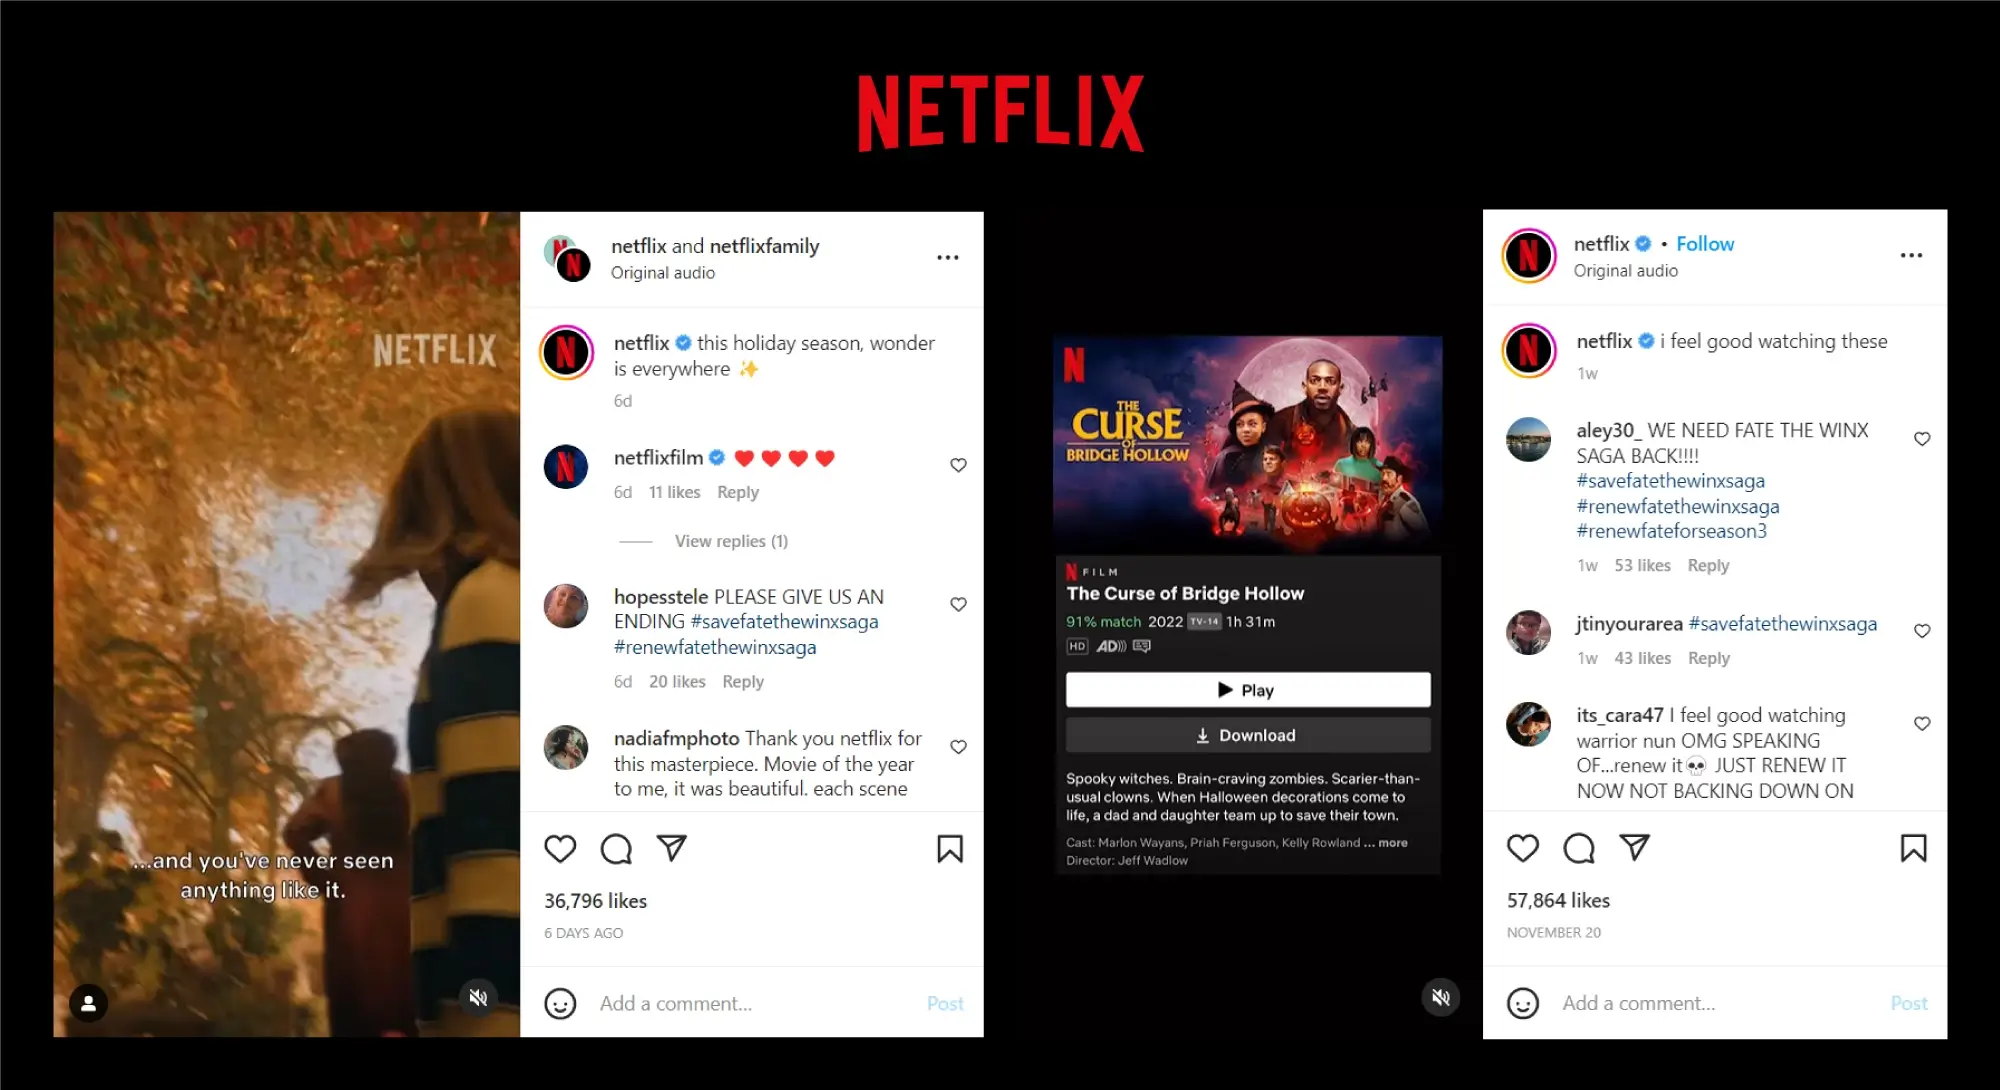 Netflix Instagram reels for holiday season marketing the curse of bridge hollow a group of wizards with a moon in the backdrop and pumpkin with a carved face video compilation 